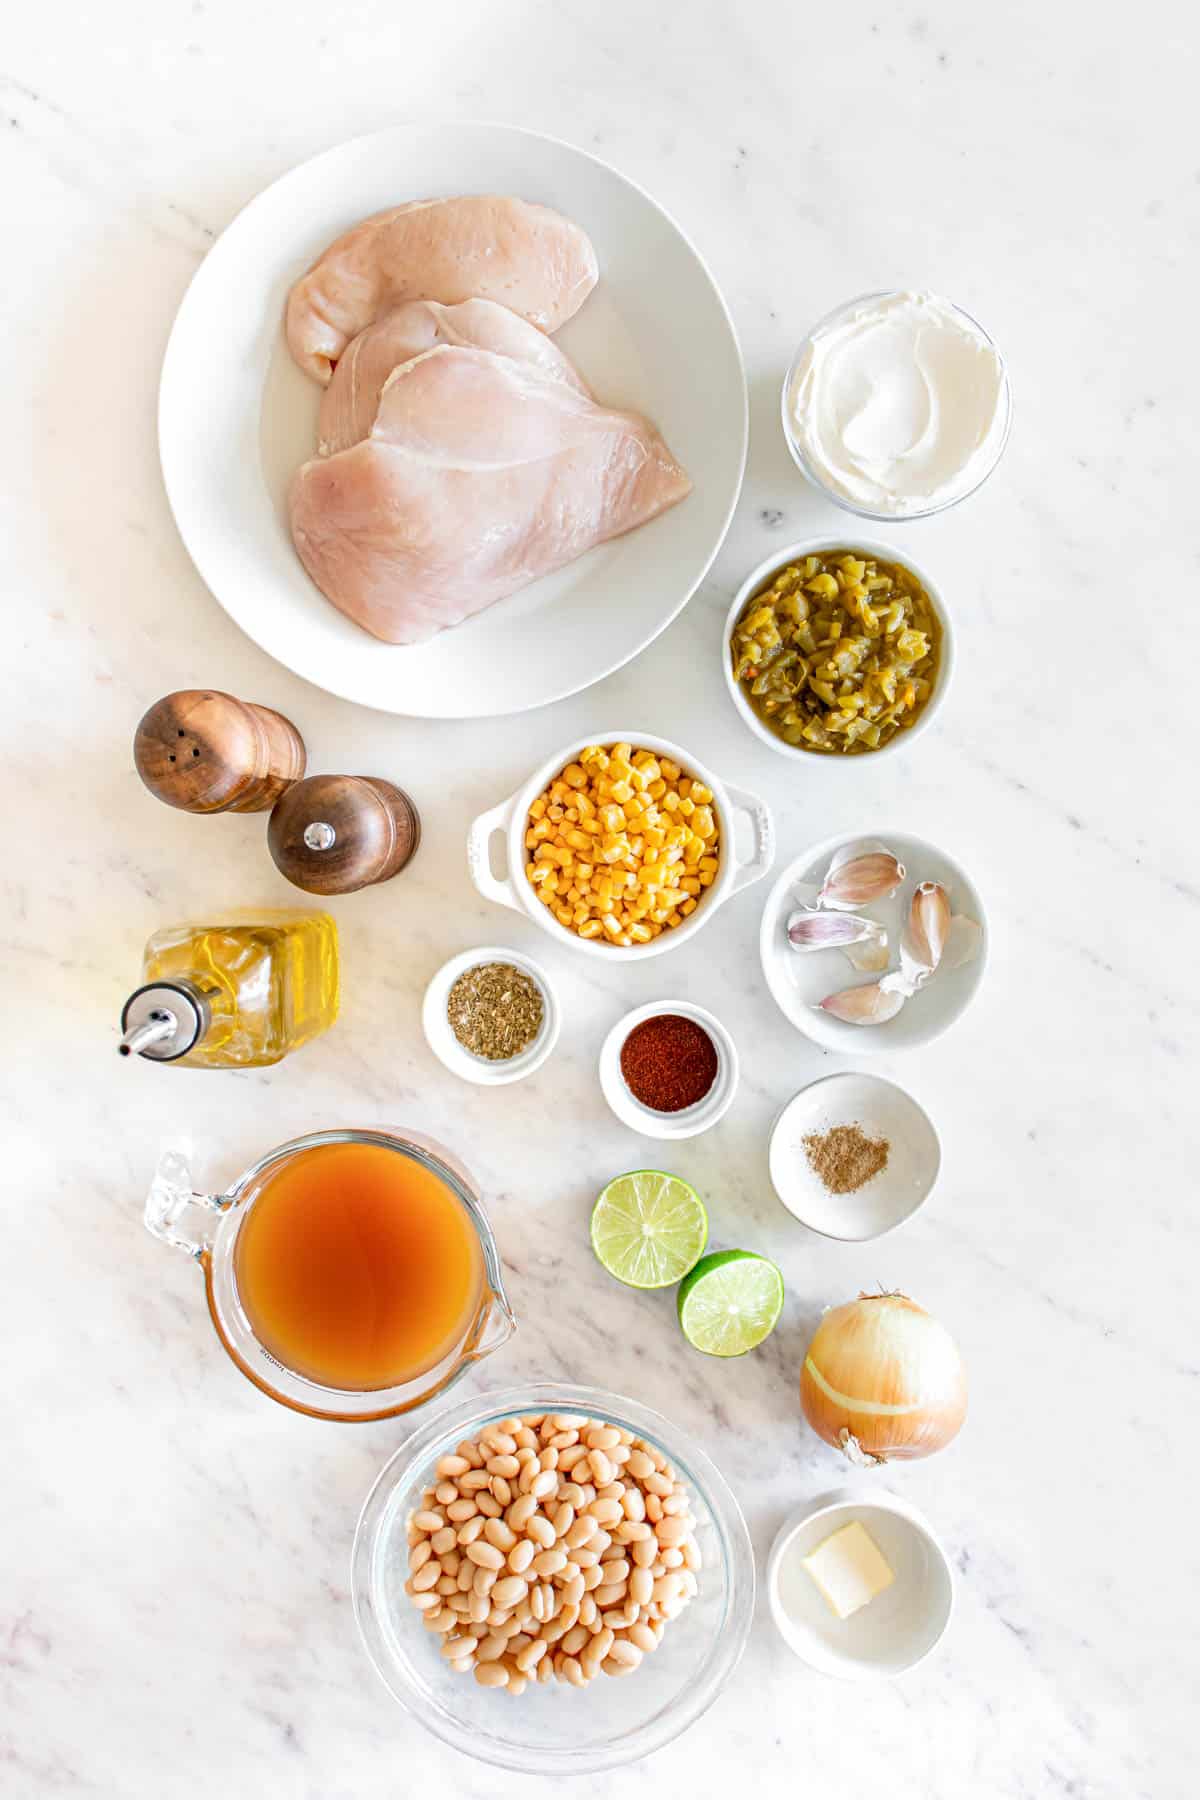 Ingredients for white chicken chili laid out on a kitchen counter, including chicken breasts, spices, corn, beans, and other condiments.